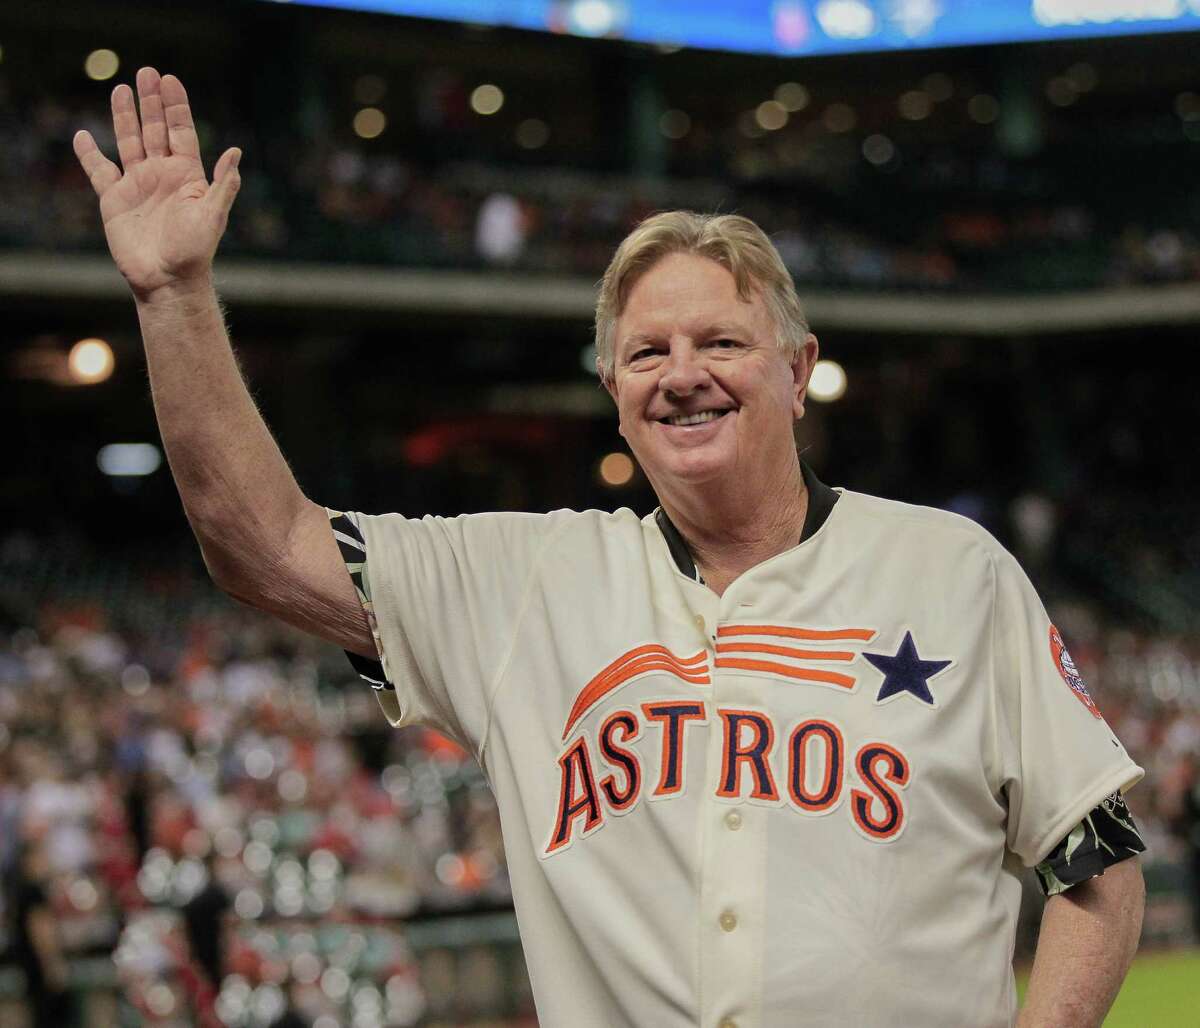 Legends on hand for Astros' 50th anniversary celebration